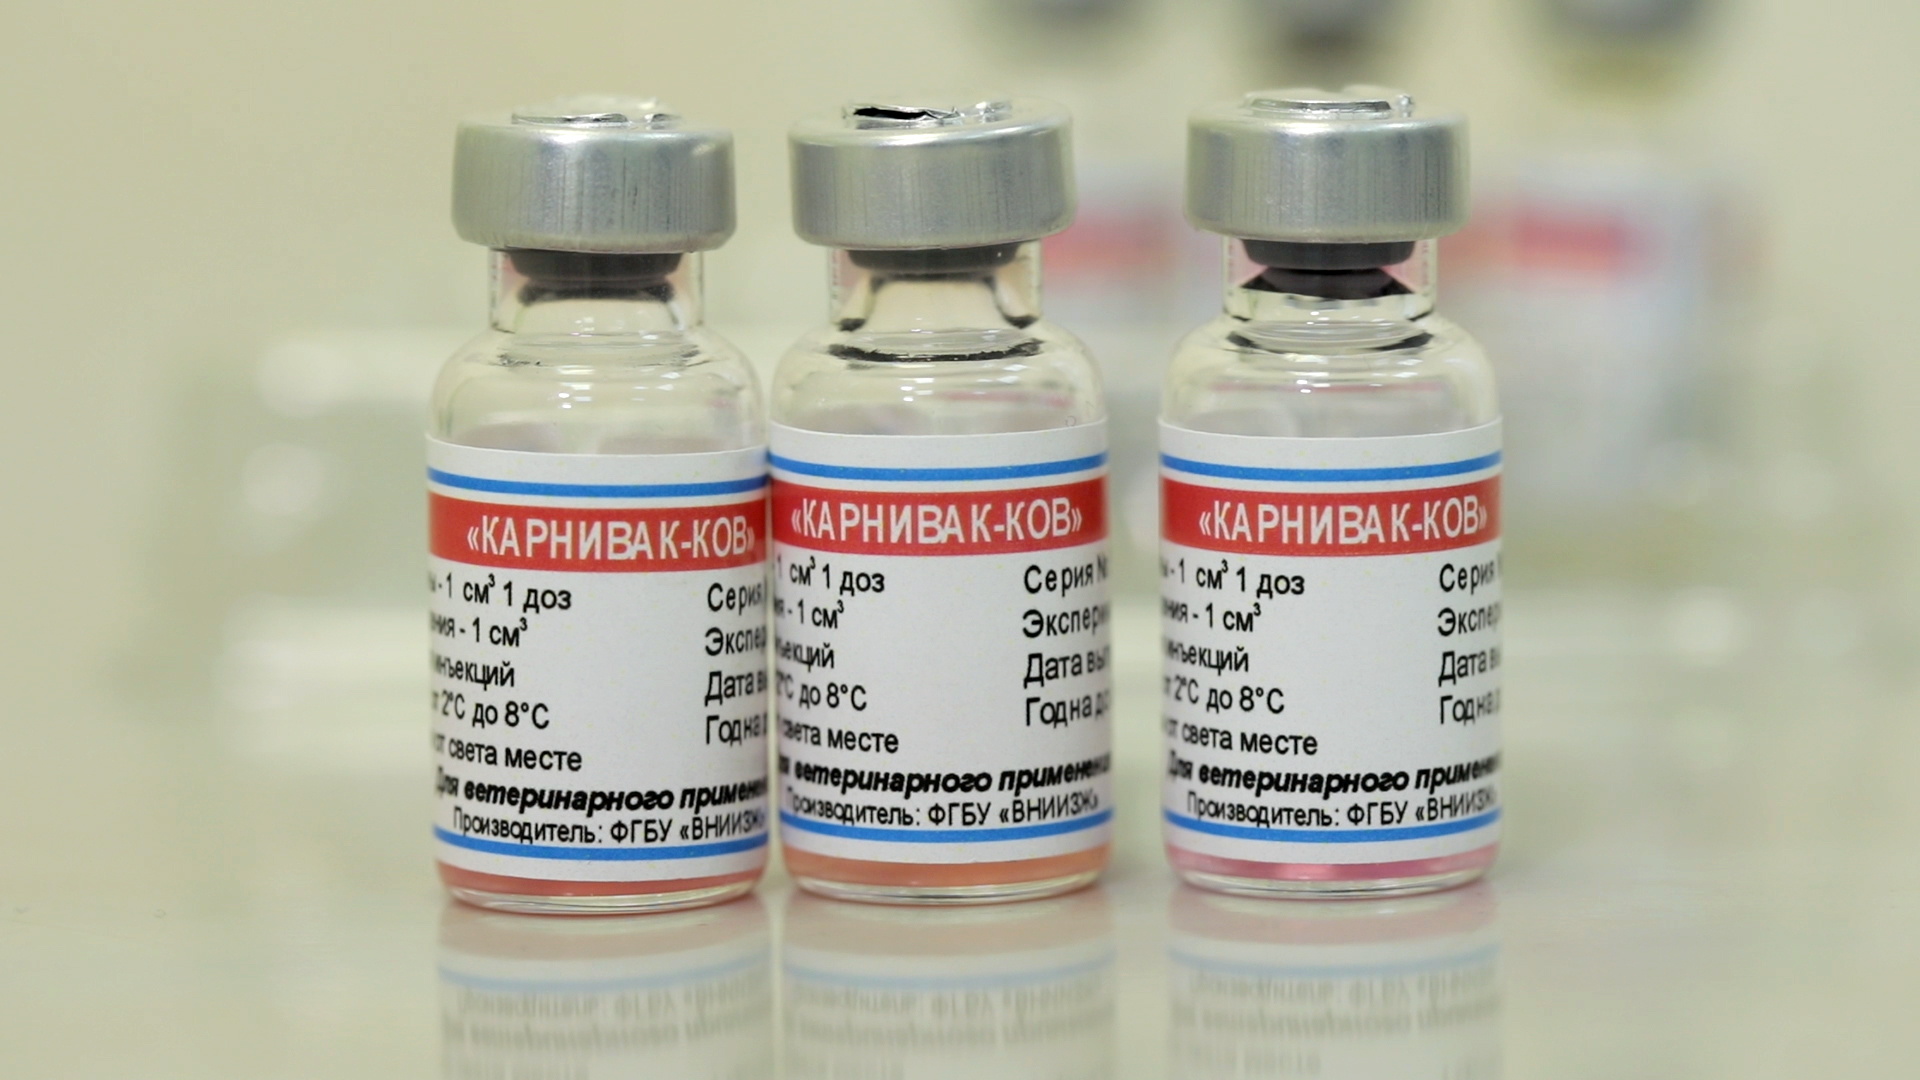 Vials of the Carnivac-Cov vaccine for animals against the coronavirus disease (COVID-19) are pictured at a clinic in Moscow